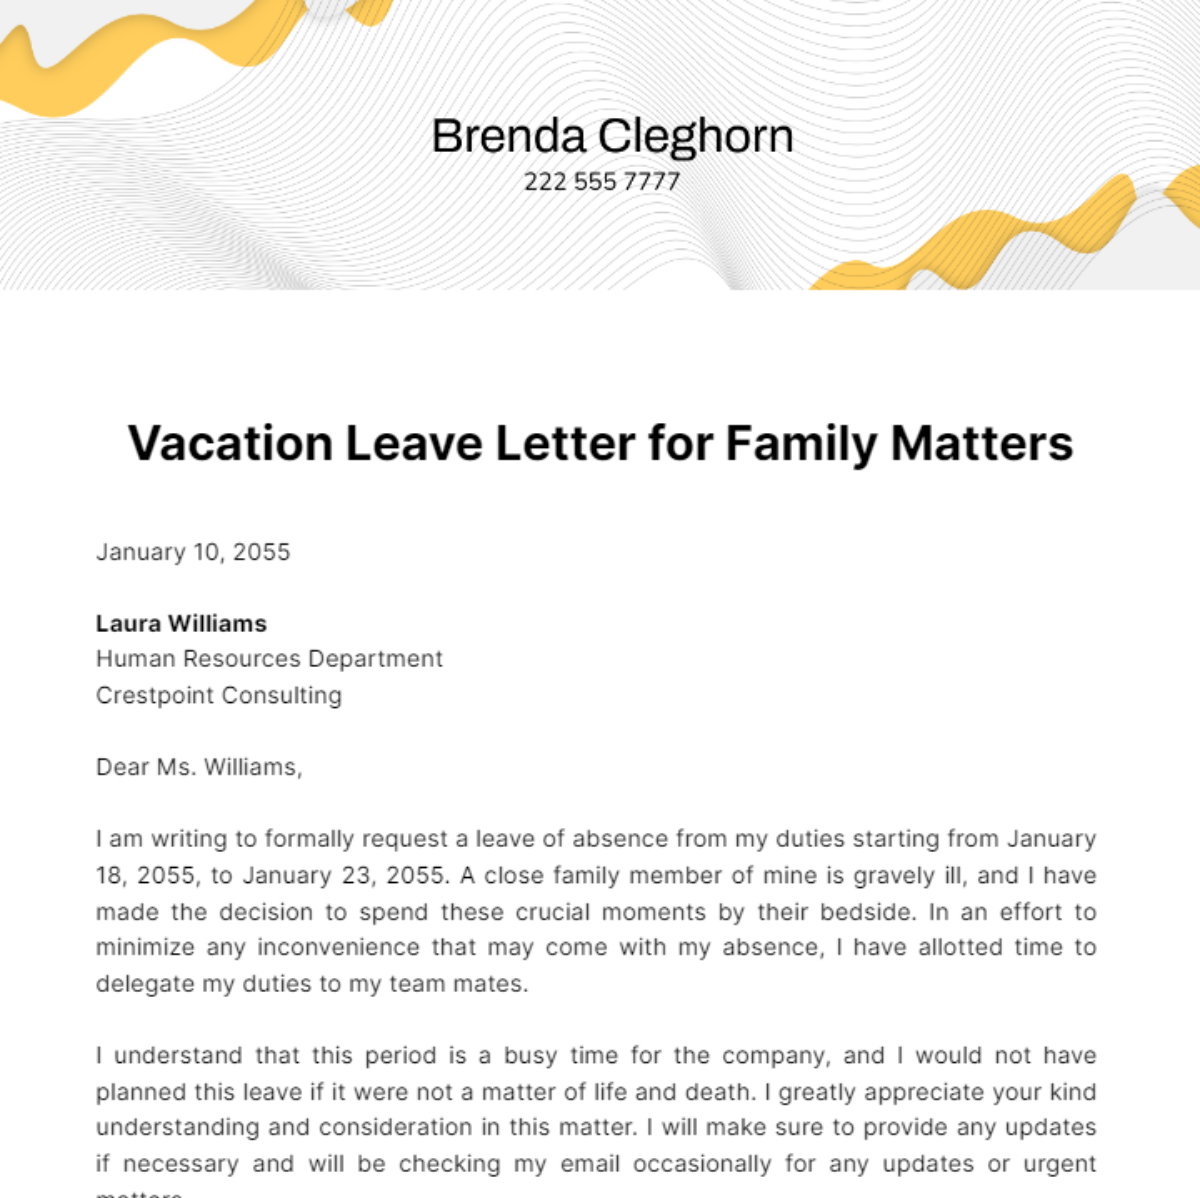 Vacation Leave Letter for Family Matters Template